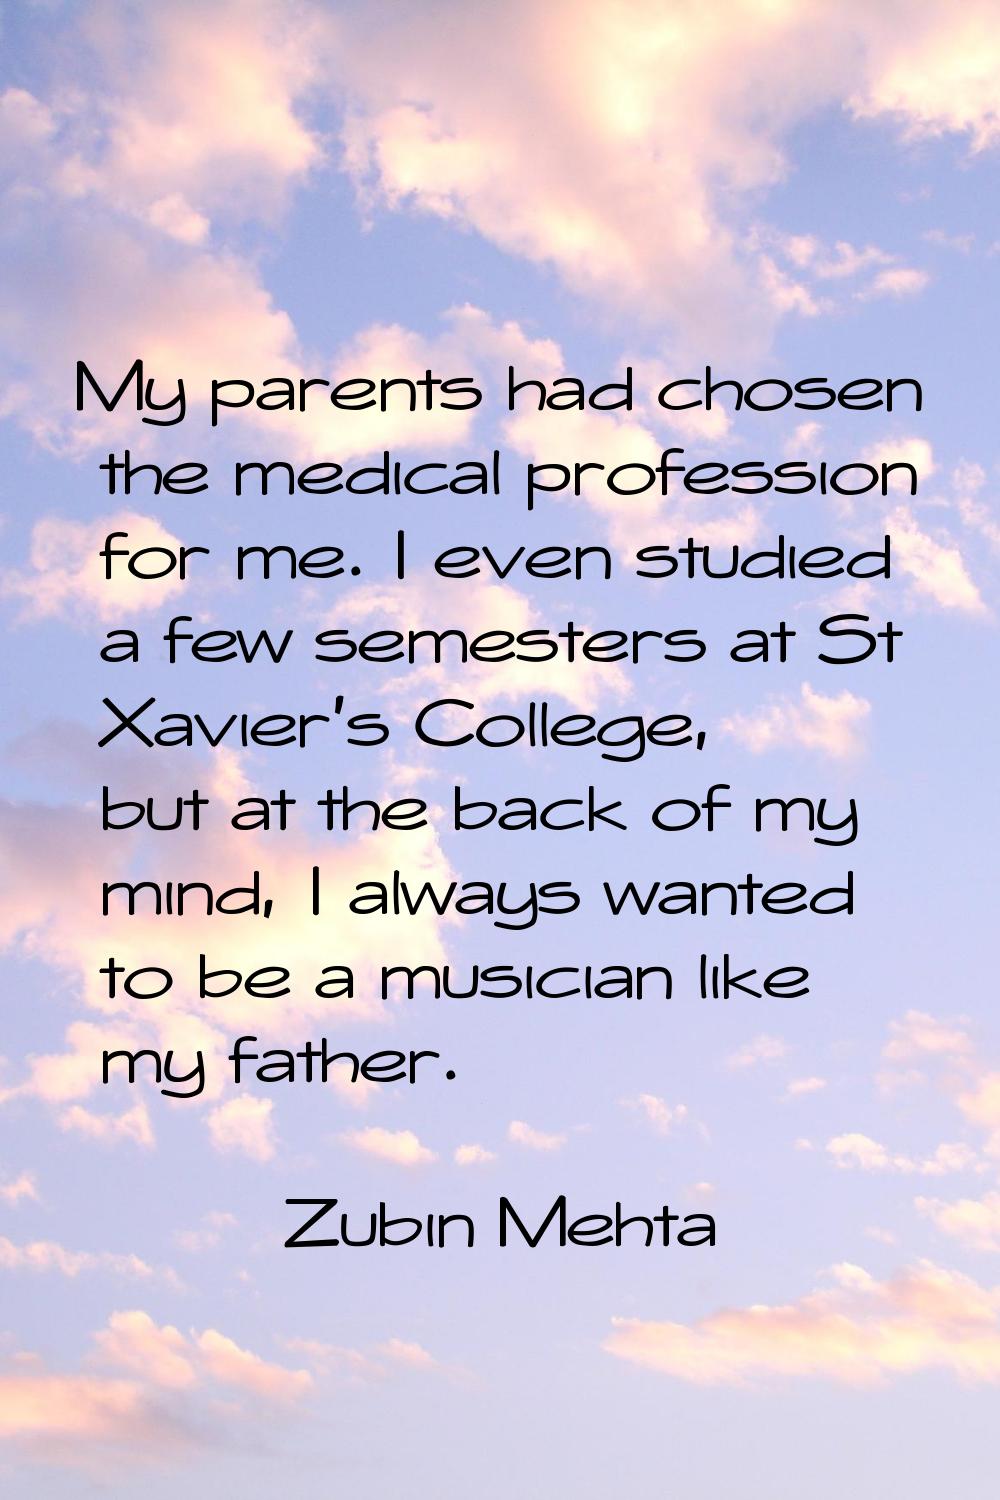 My parents had chosen the medical profession for me. I even studied a few semesters at St Xavier's 